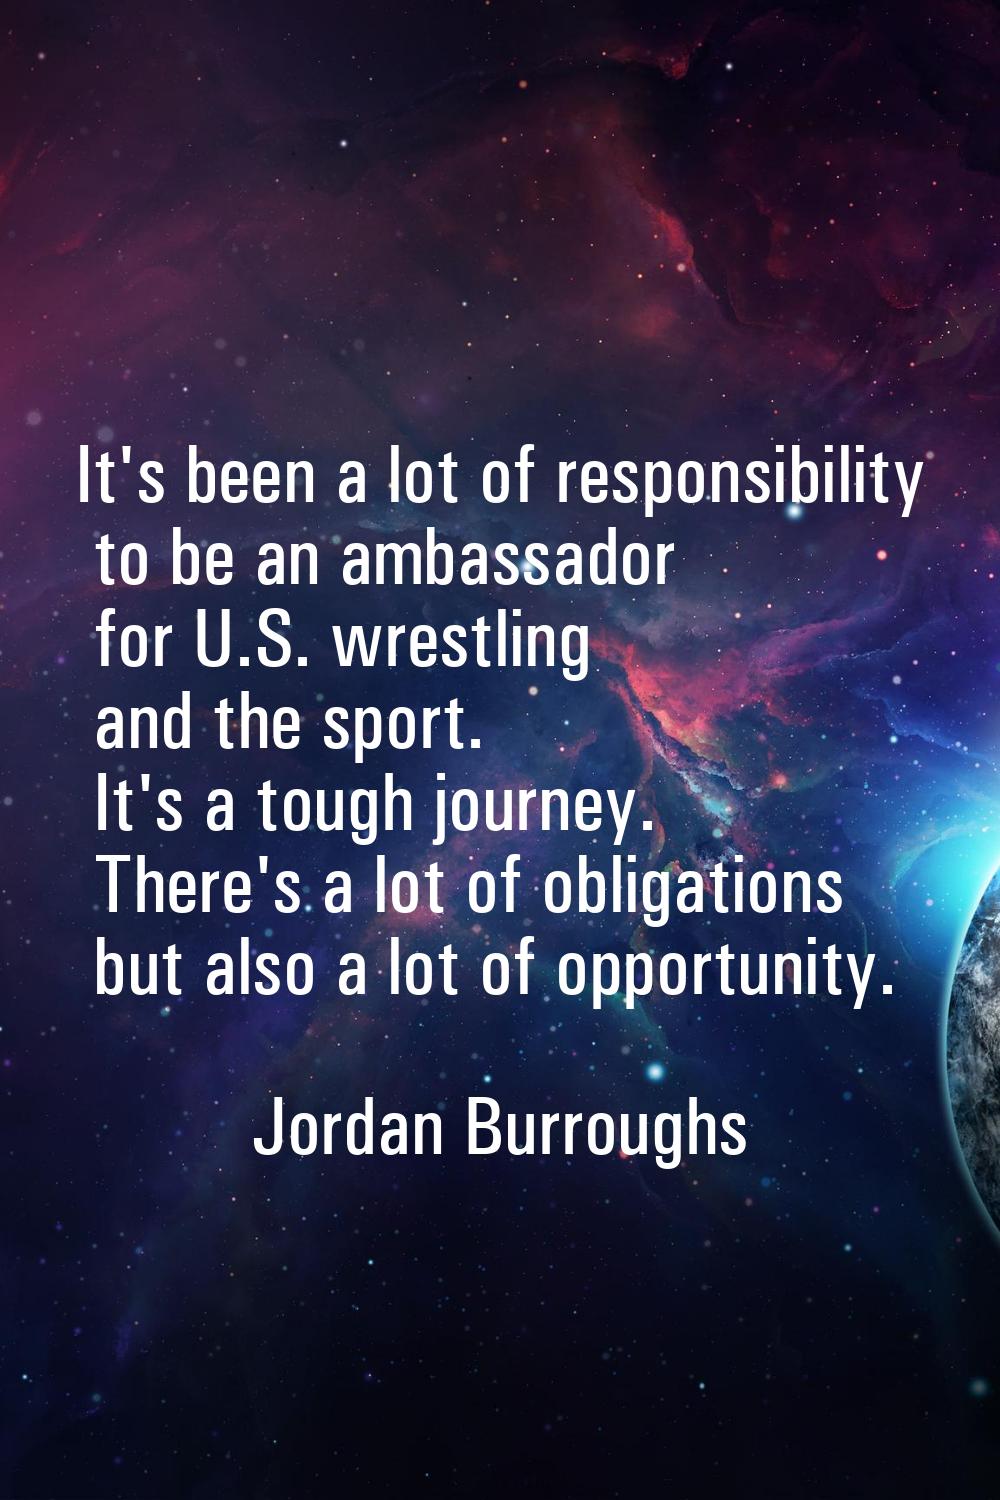 It's been a lot of responsibility to be an ambassador for U.S. wrestling and the sport. It's a toug